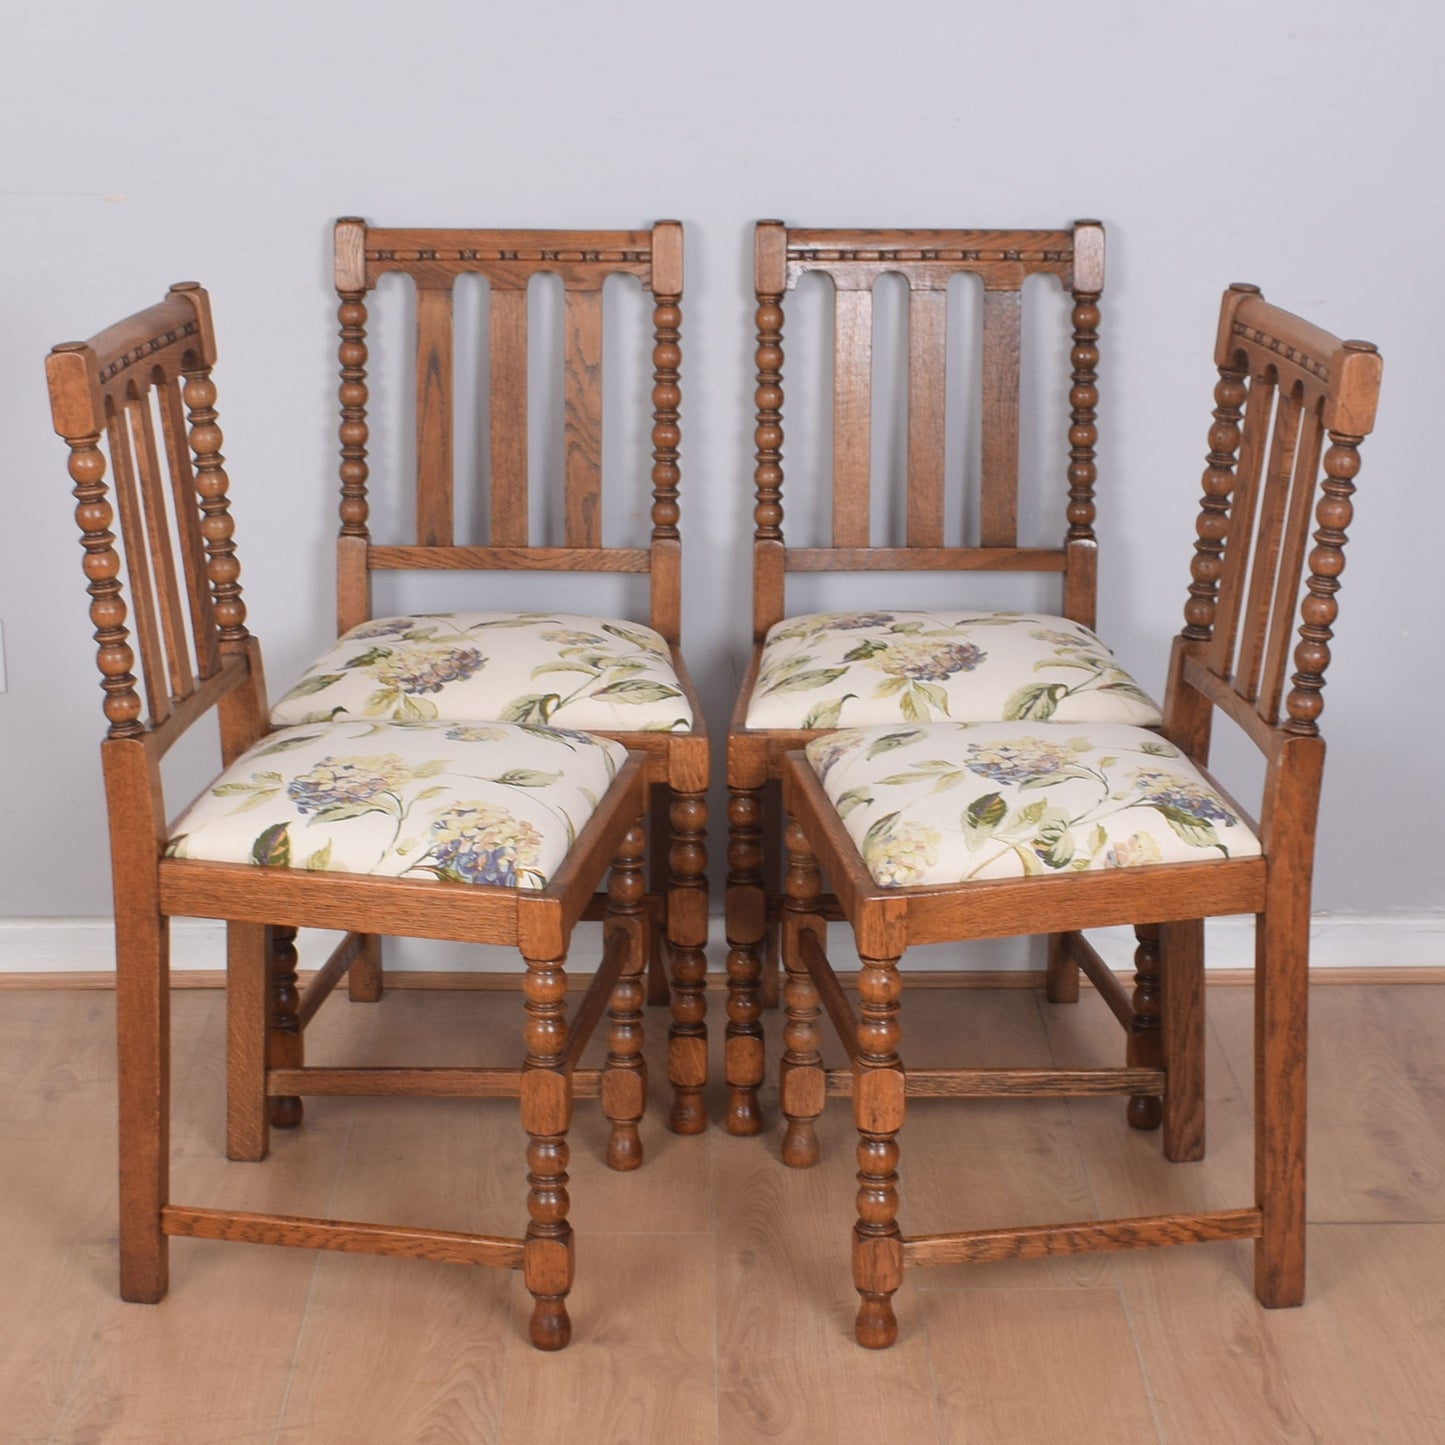 Oak Extentable Dining Table with Six Chairs